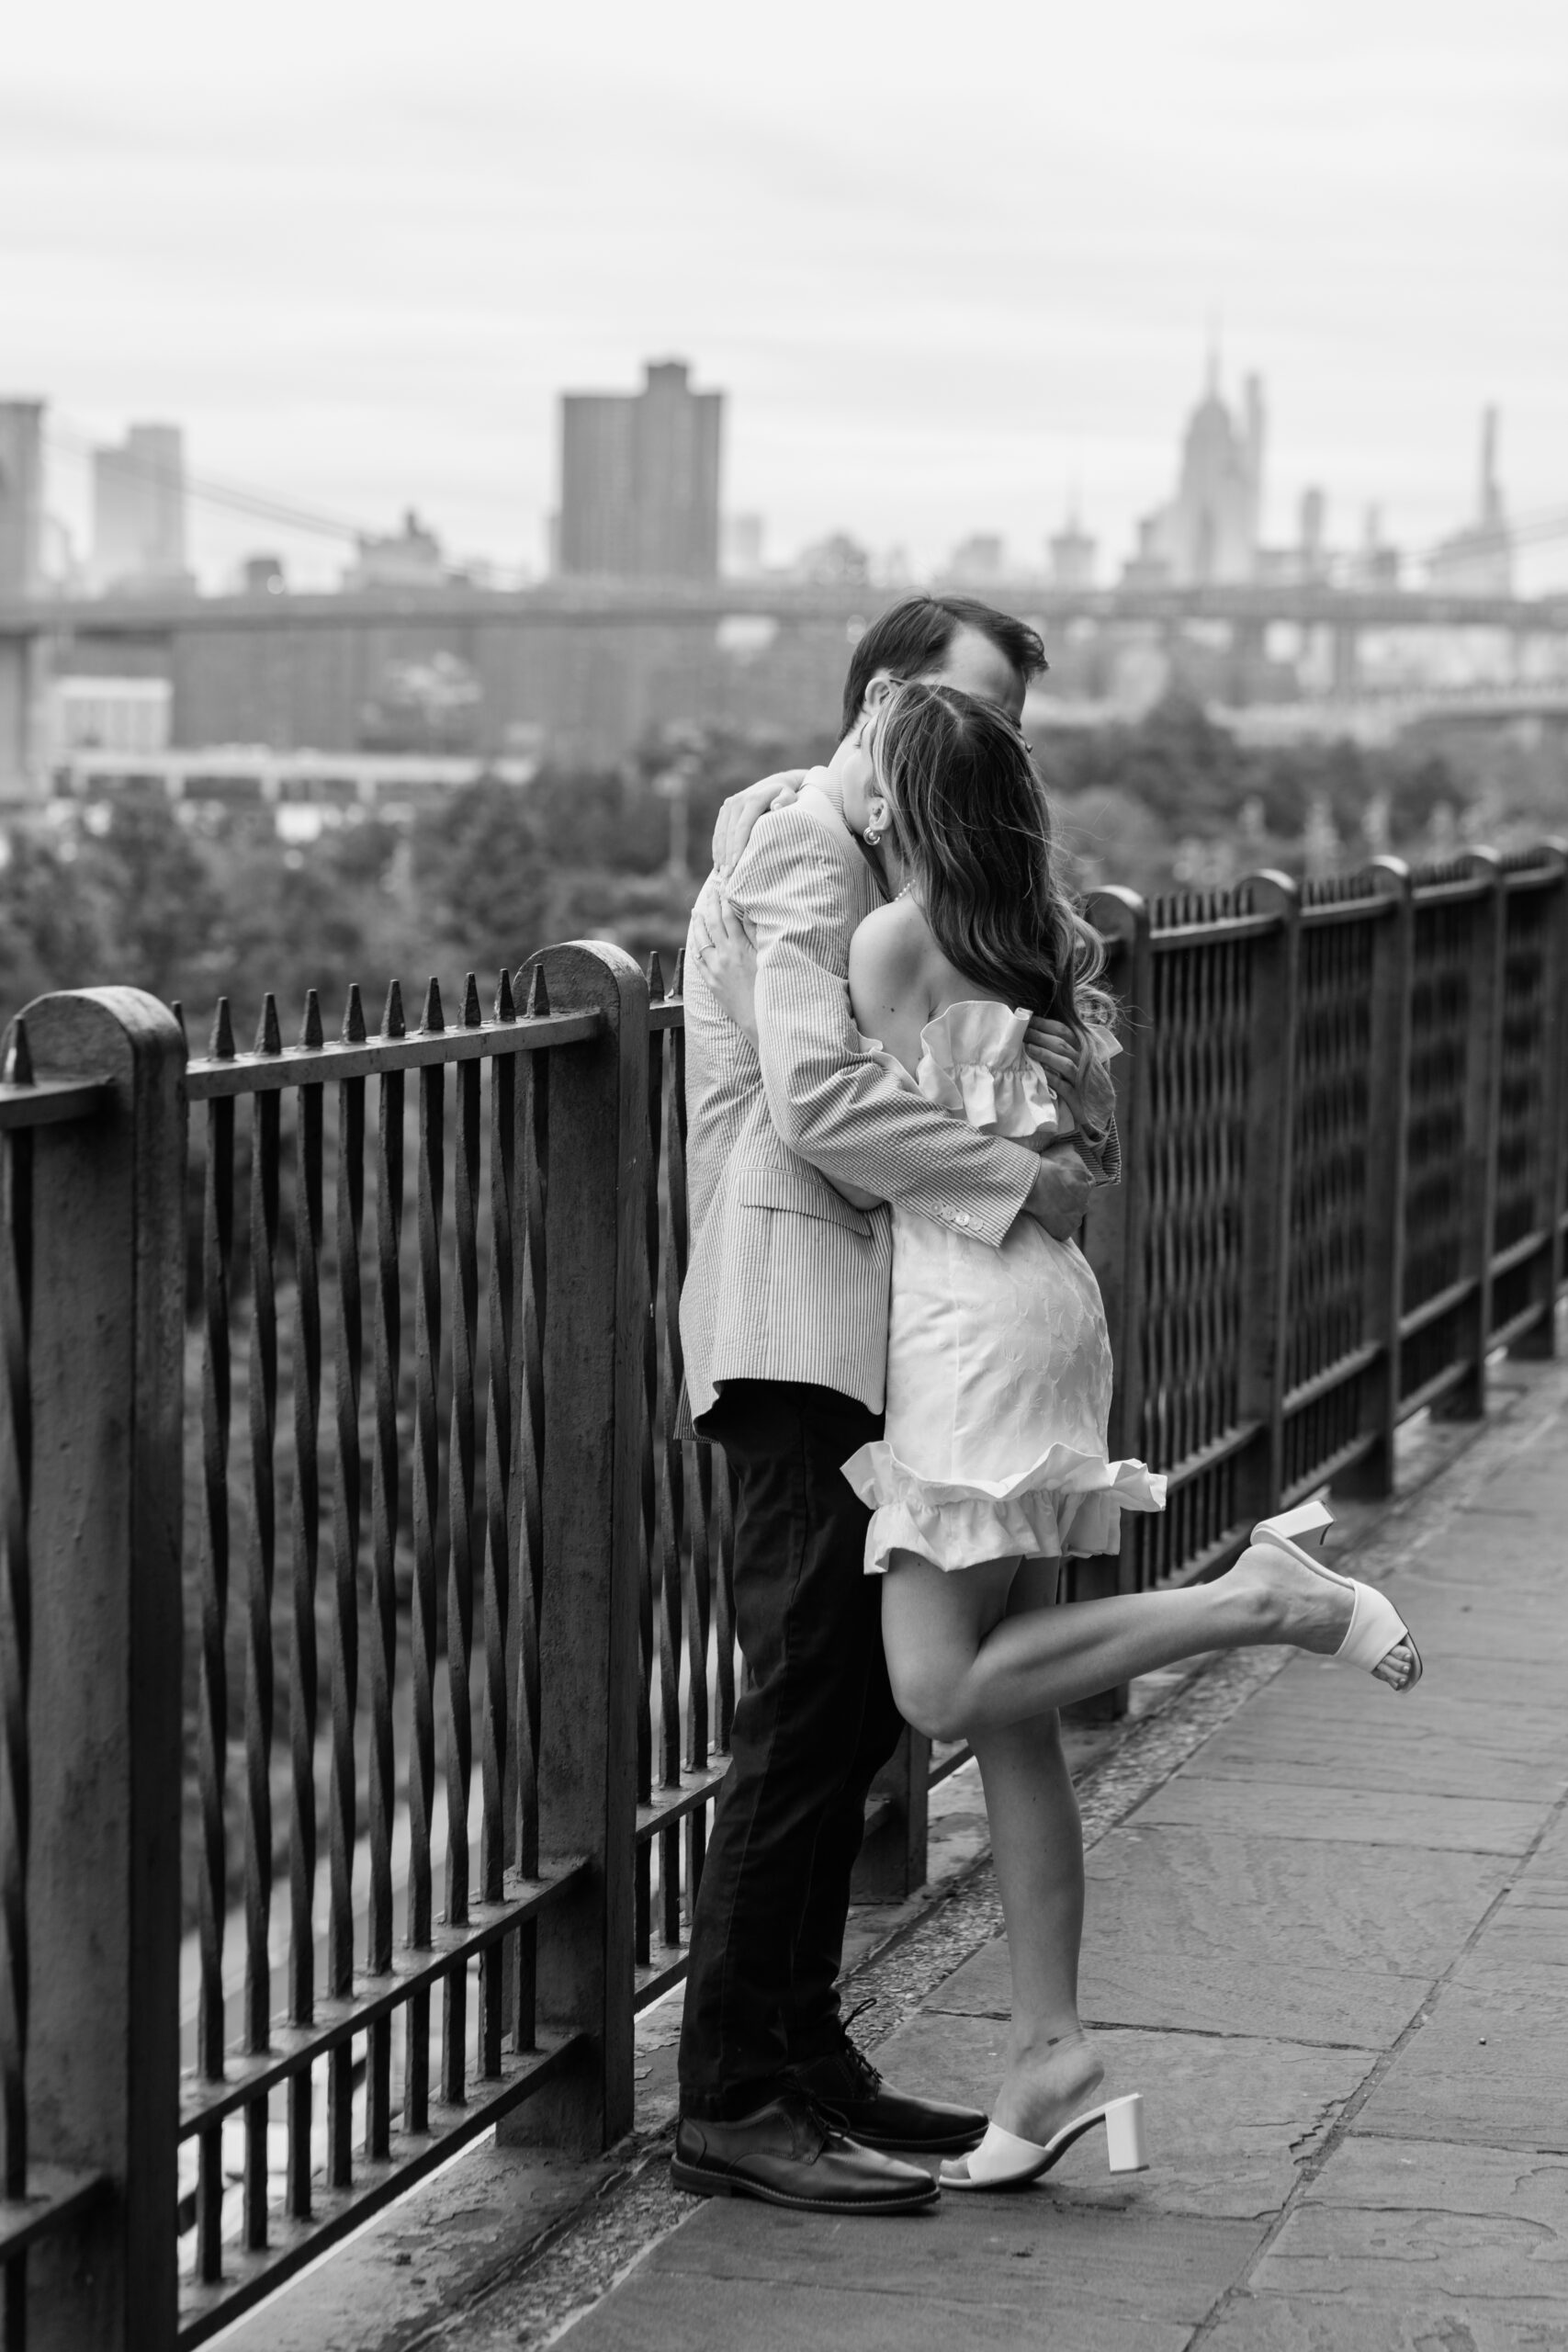 An engaged couple--a thin white man in dark pants and a seersucker suit jacket and a thin white woman in a stylish short white dress and heels hug on the Brooklyn Heights Promenade. She is kicking up her heel. The photo is black and white.